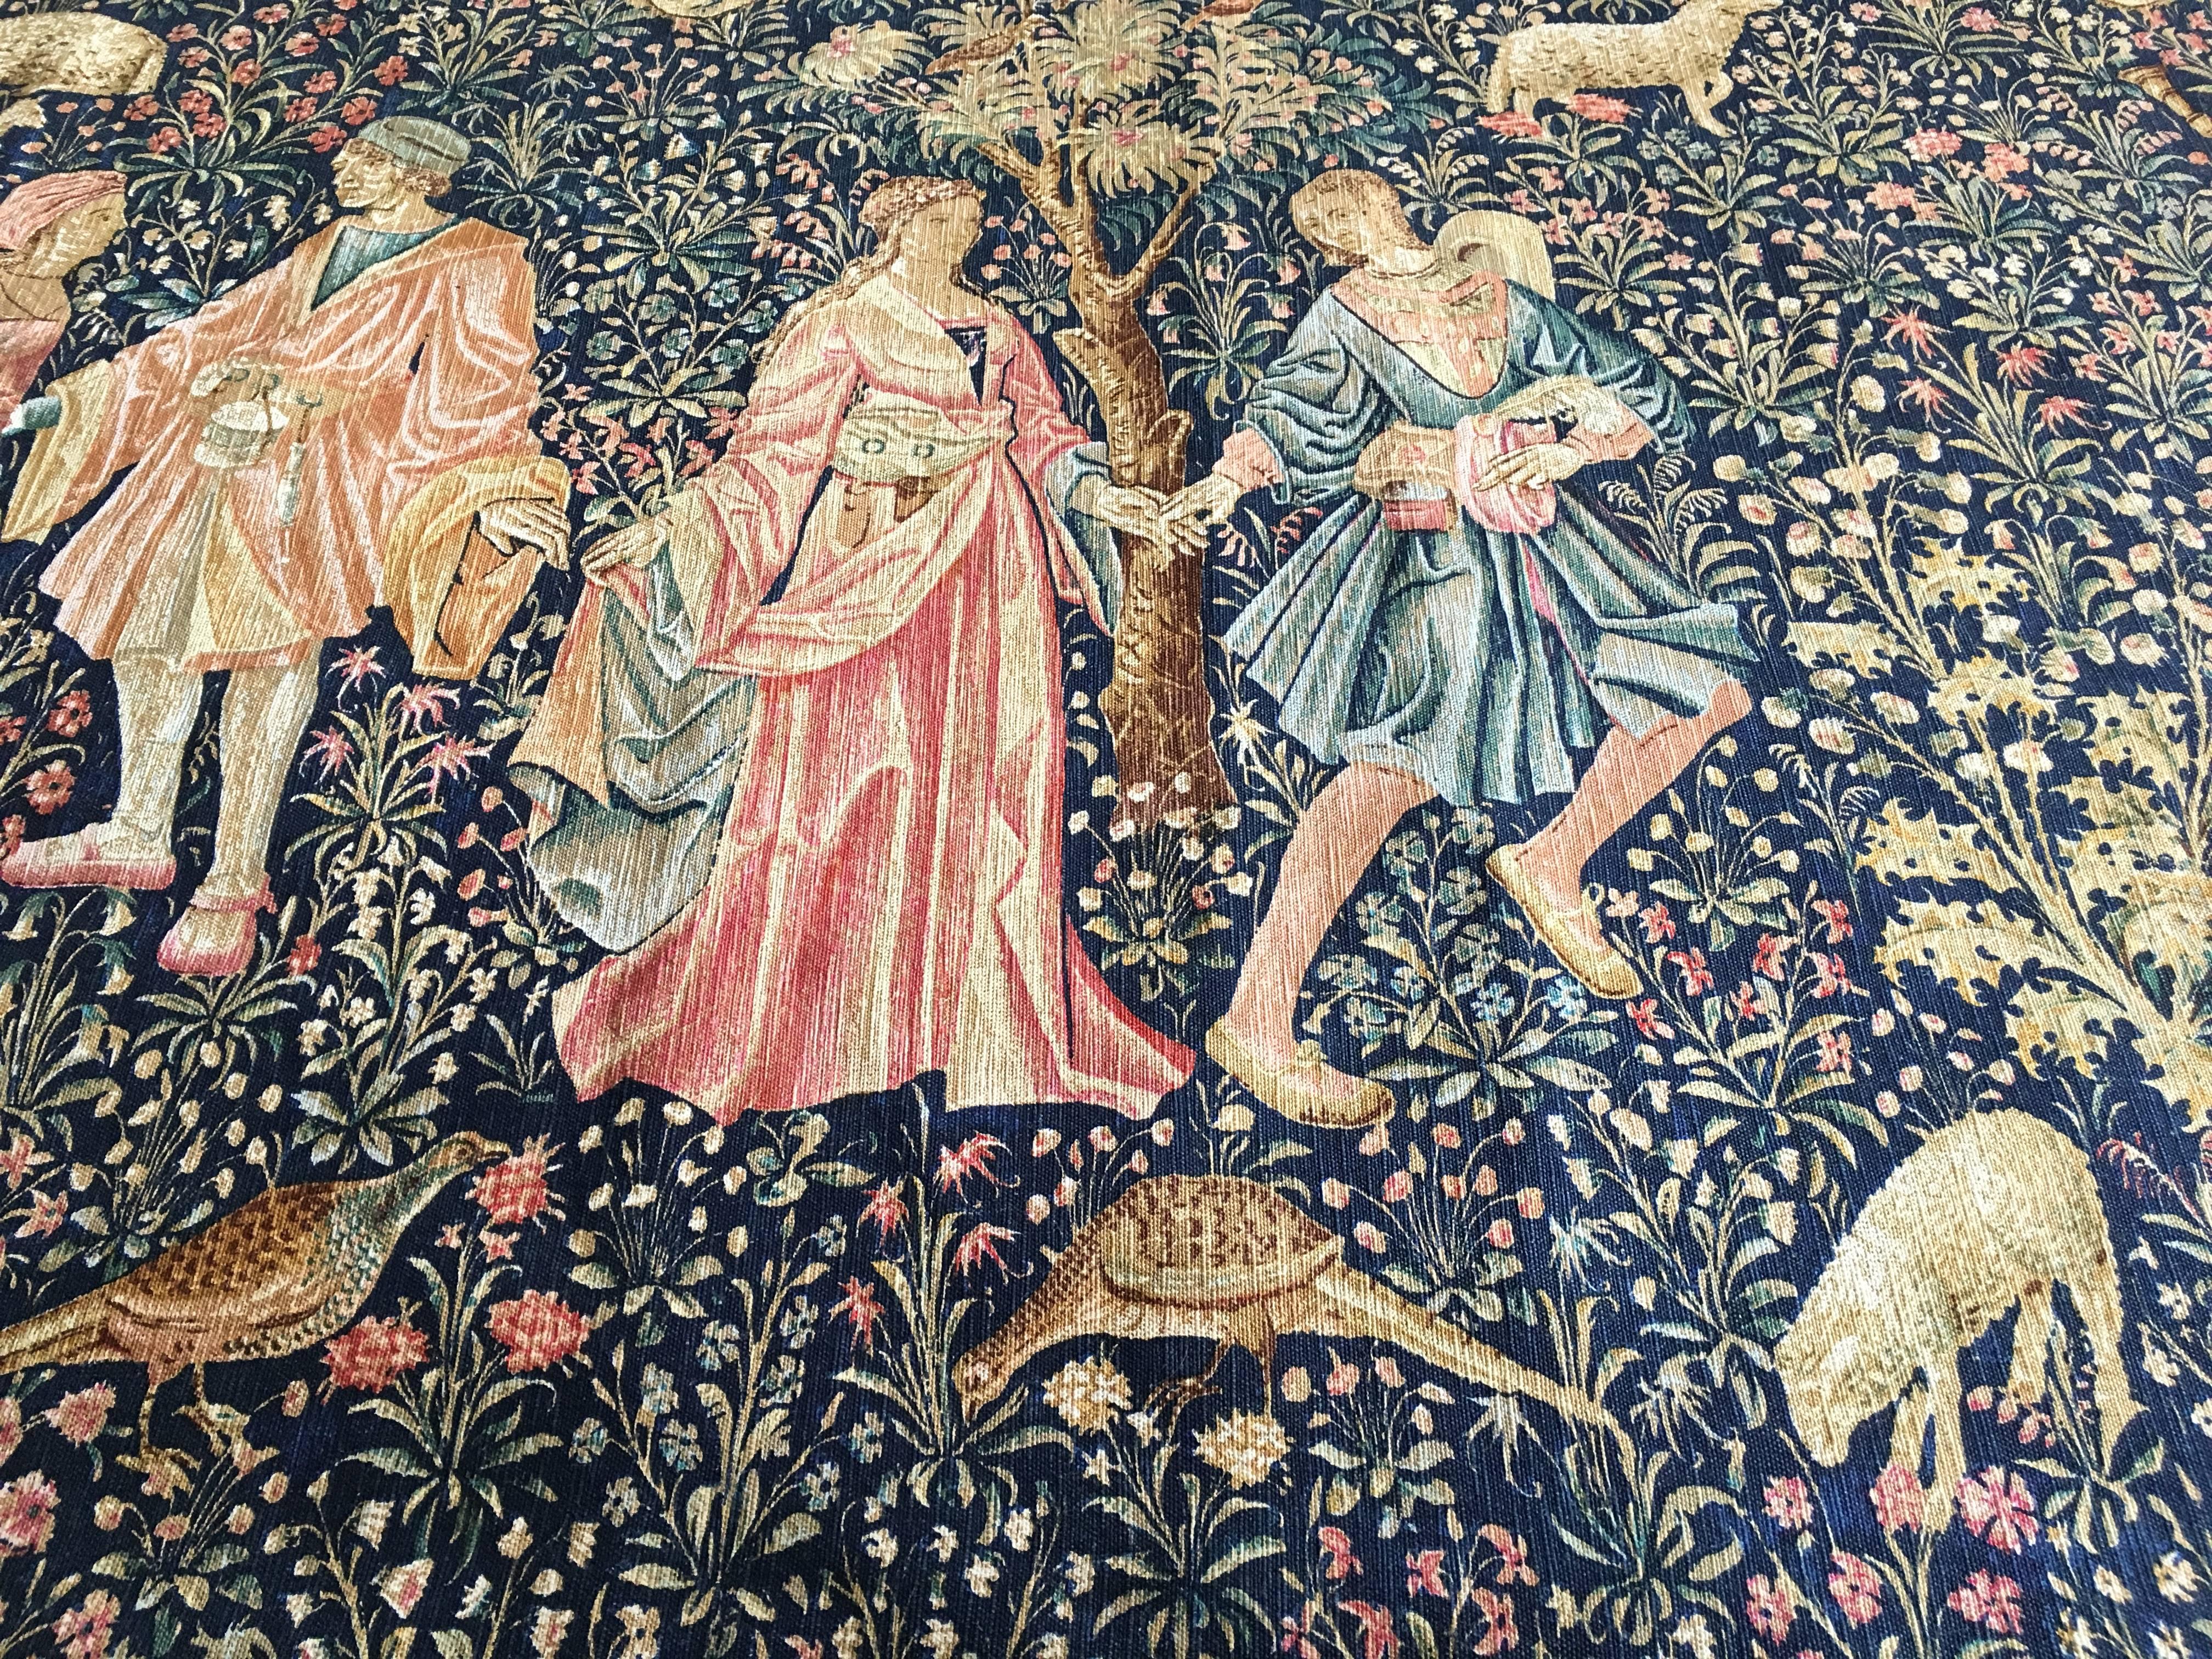 Large tapestry from the Artis flora workshop from the beginning of the 20th century based on one from the 15th century called 